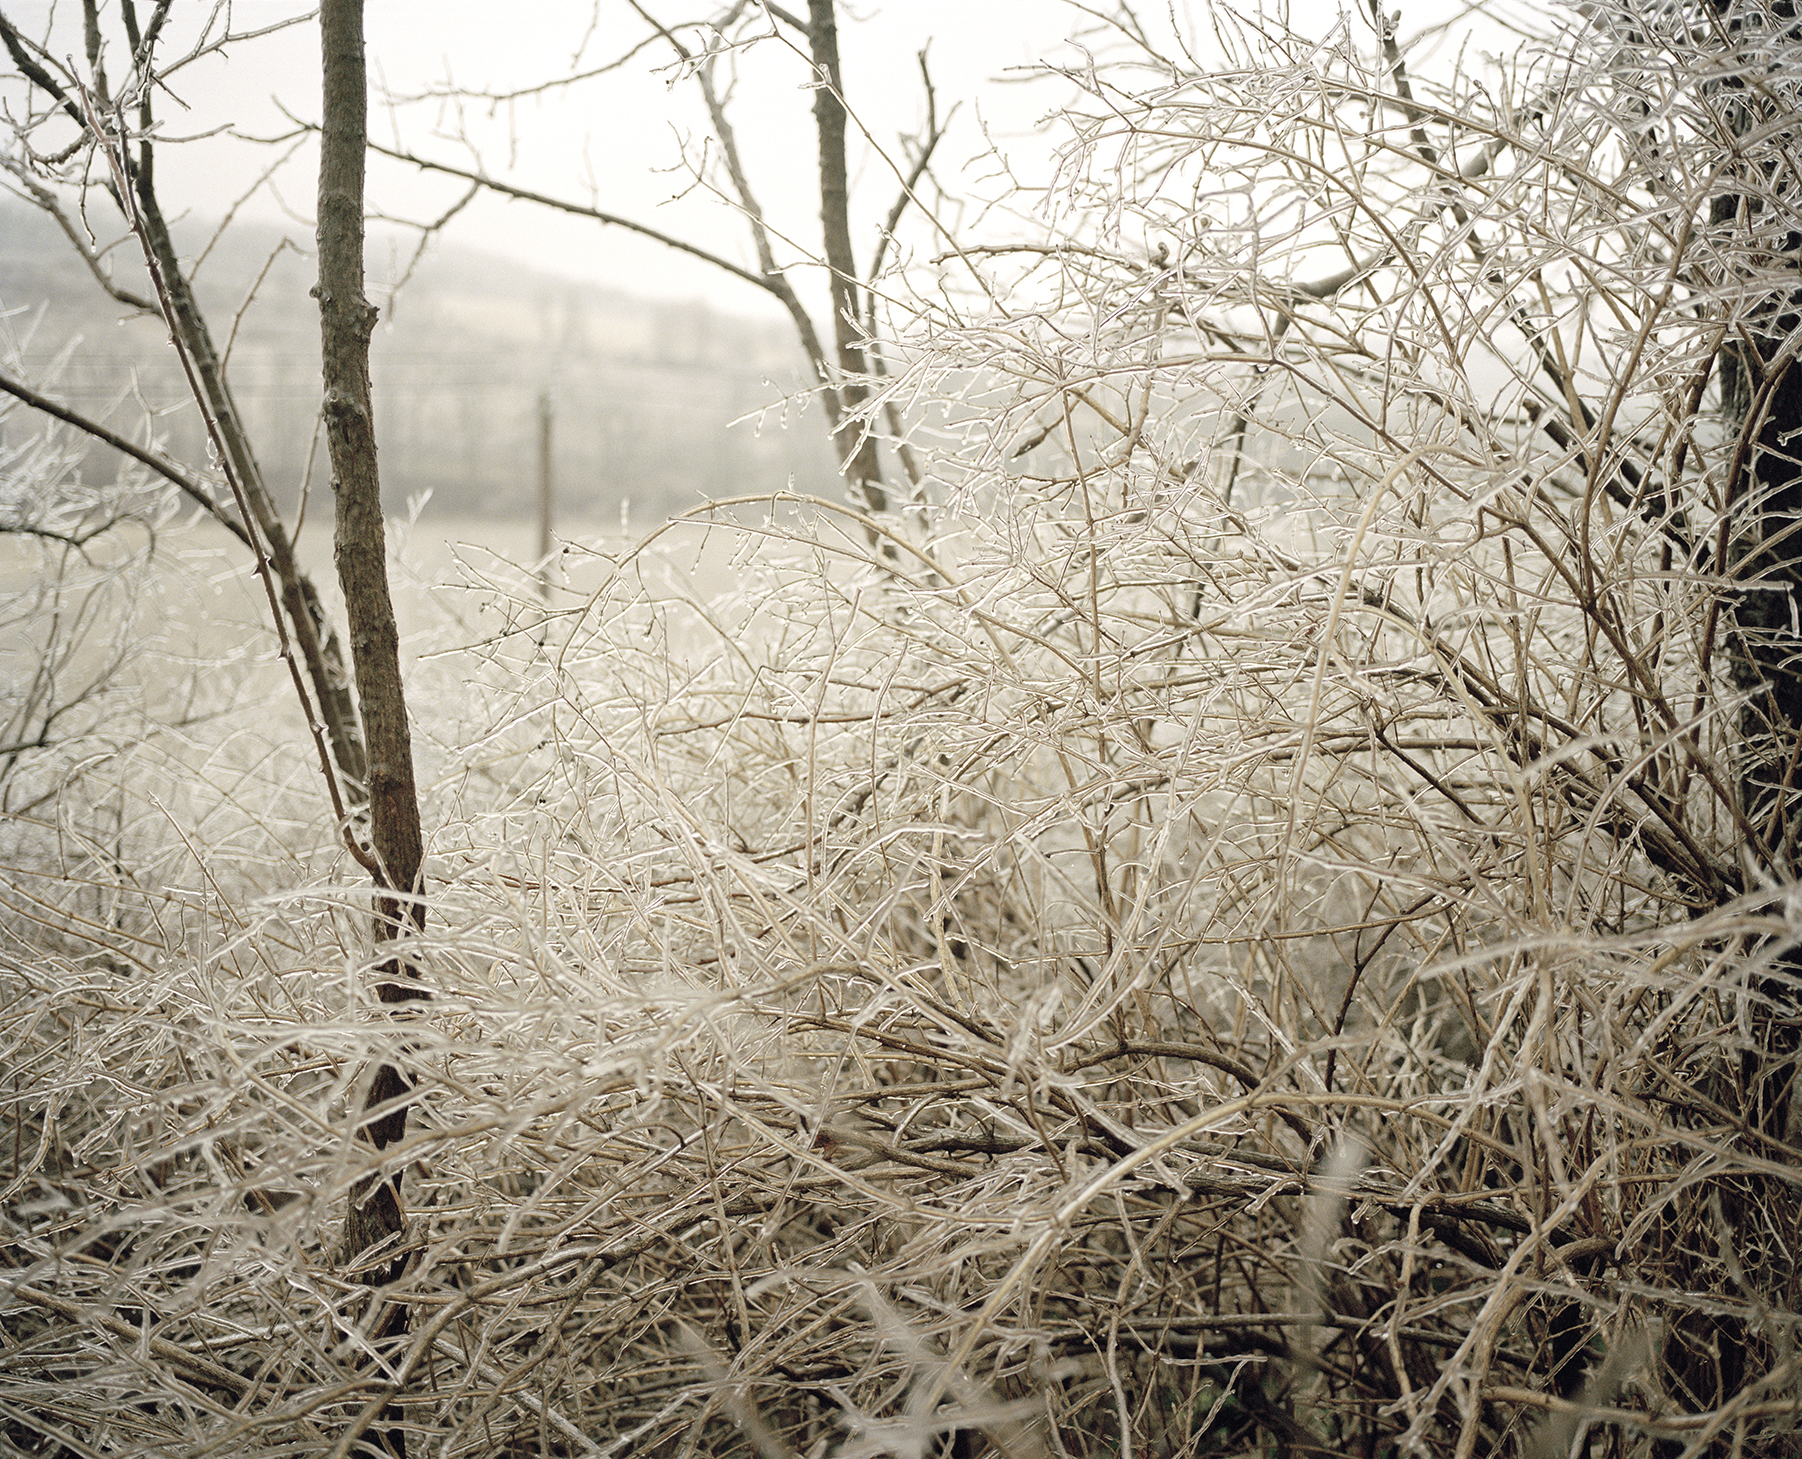    Ice Storm, Between the Thruway and Erie Canal Trail, Fultonville, NY.   , 2007    Ink jet print, edition of 5 + 2AP    16 x 19 inches  